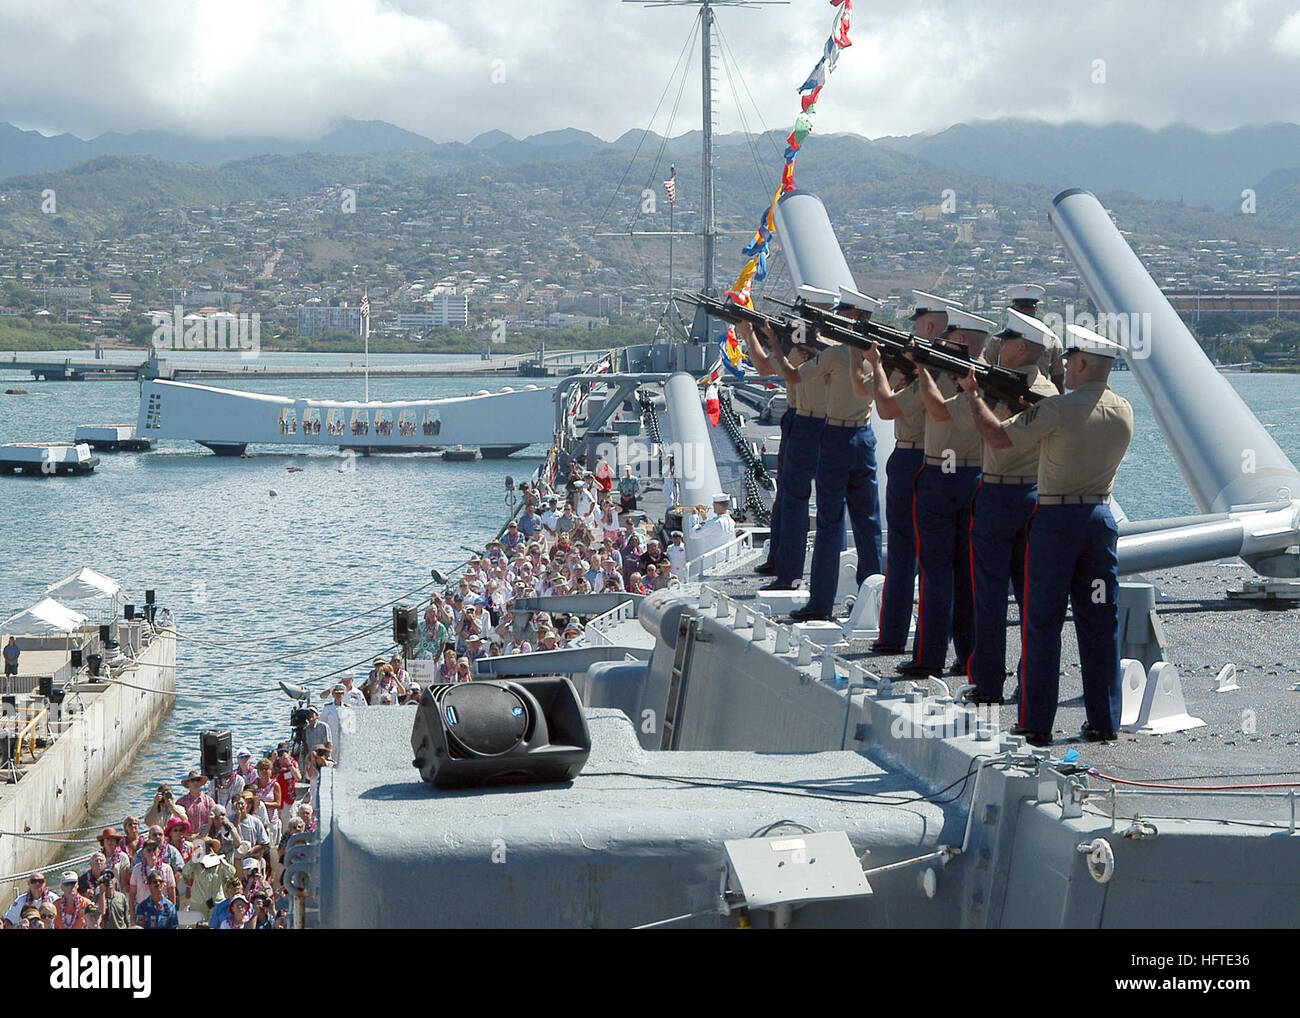 050902-N-6775N-013 Pearl Harbor, Hawaii (September 2, 2005)... Marines from Marine Forces Pacific, Hawaii perform the ceremonial ìRifle Volley Saluteî during the 60th Anniversary of the end of World War II held on board the USS Missouri(BB 63) Memorial in Pearl Harbor, Hawaii.  The event is a commemoration of the formal surrender of Japan marking the end of the war. The surrender took place onboard USS Missouri Sept. 2, 1945, in Tokyo Bay. Official U.S. Navy photo by Photographer's Mate 2nd Class Justin P. Nesbitt (Released) US Navy 050902-N-6775N-013 A formation of Marines assigned to Marine  Stock Photo